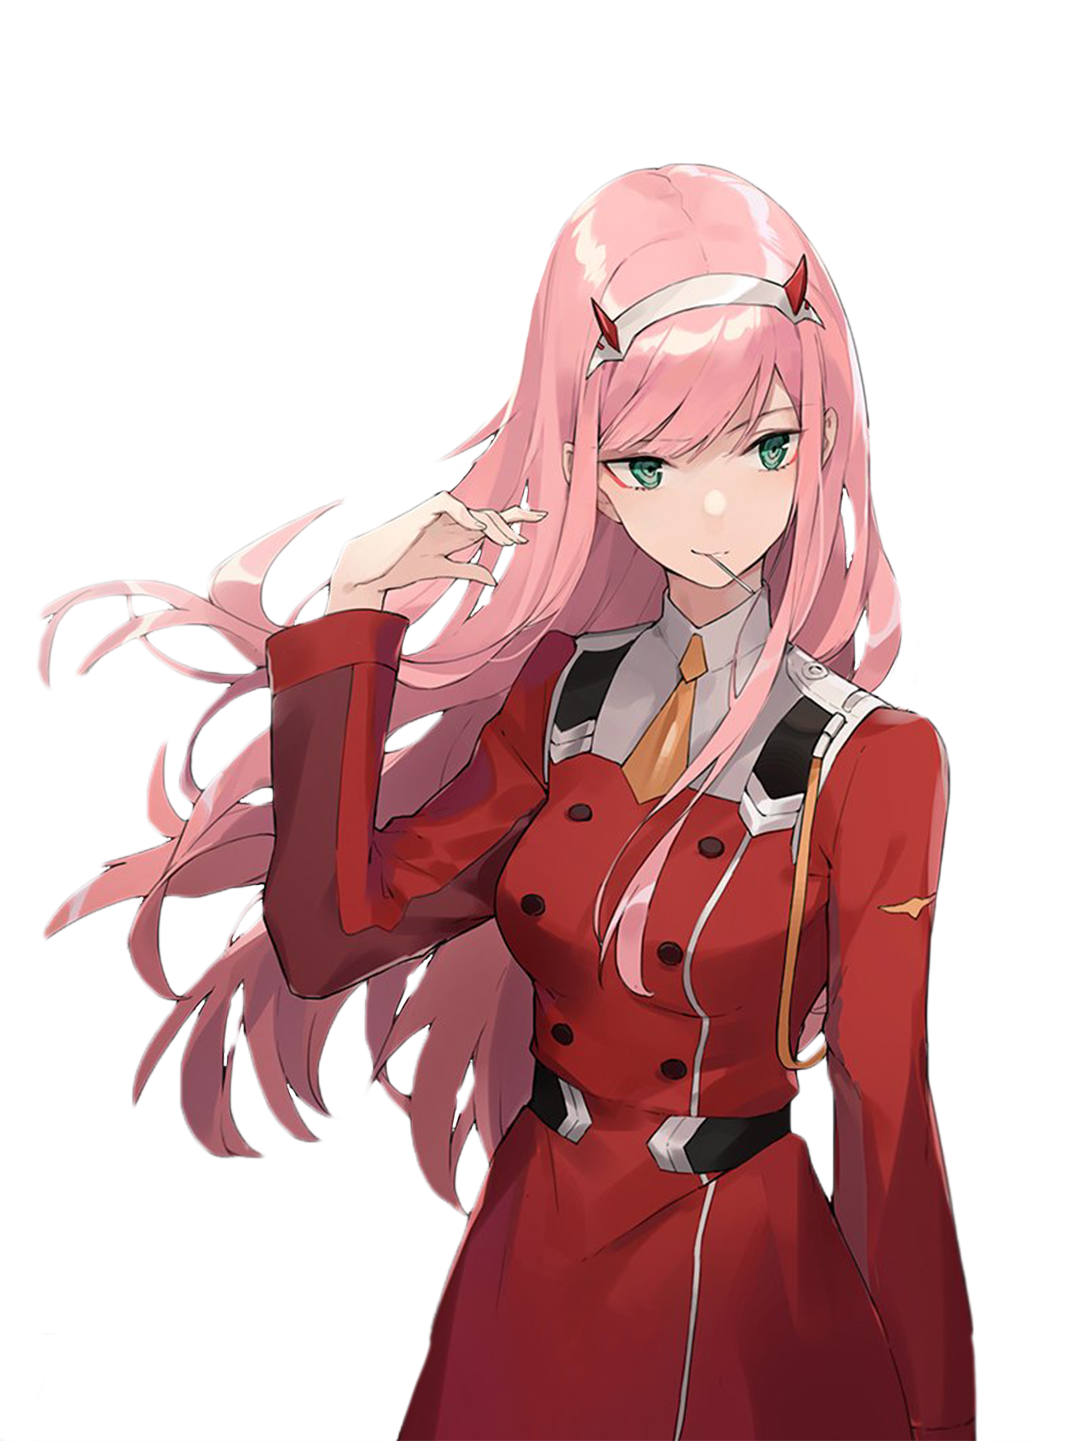 Hd Wallpaper Background Image Darling In The Franxx 02 Hd Png